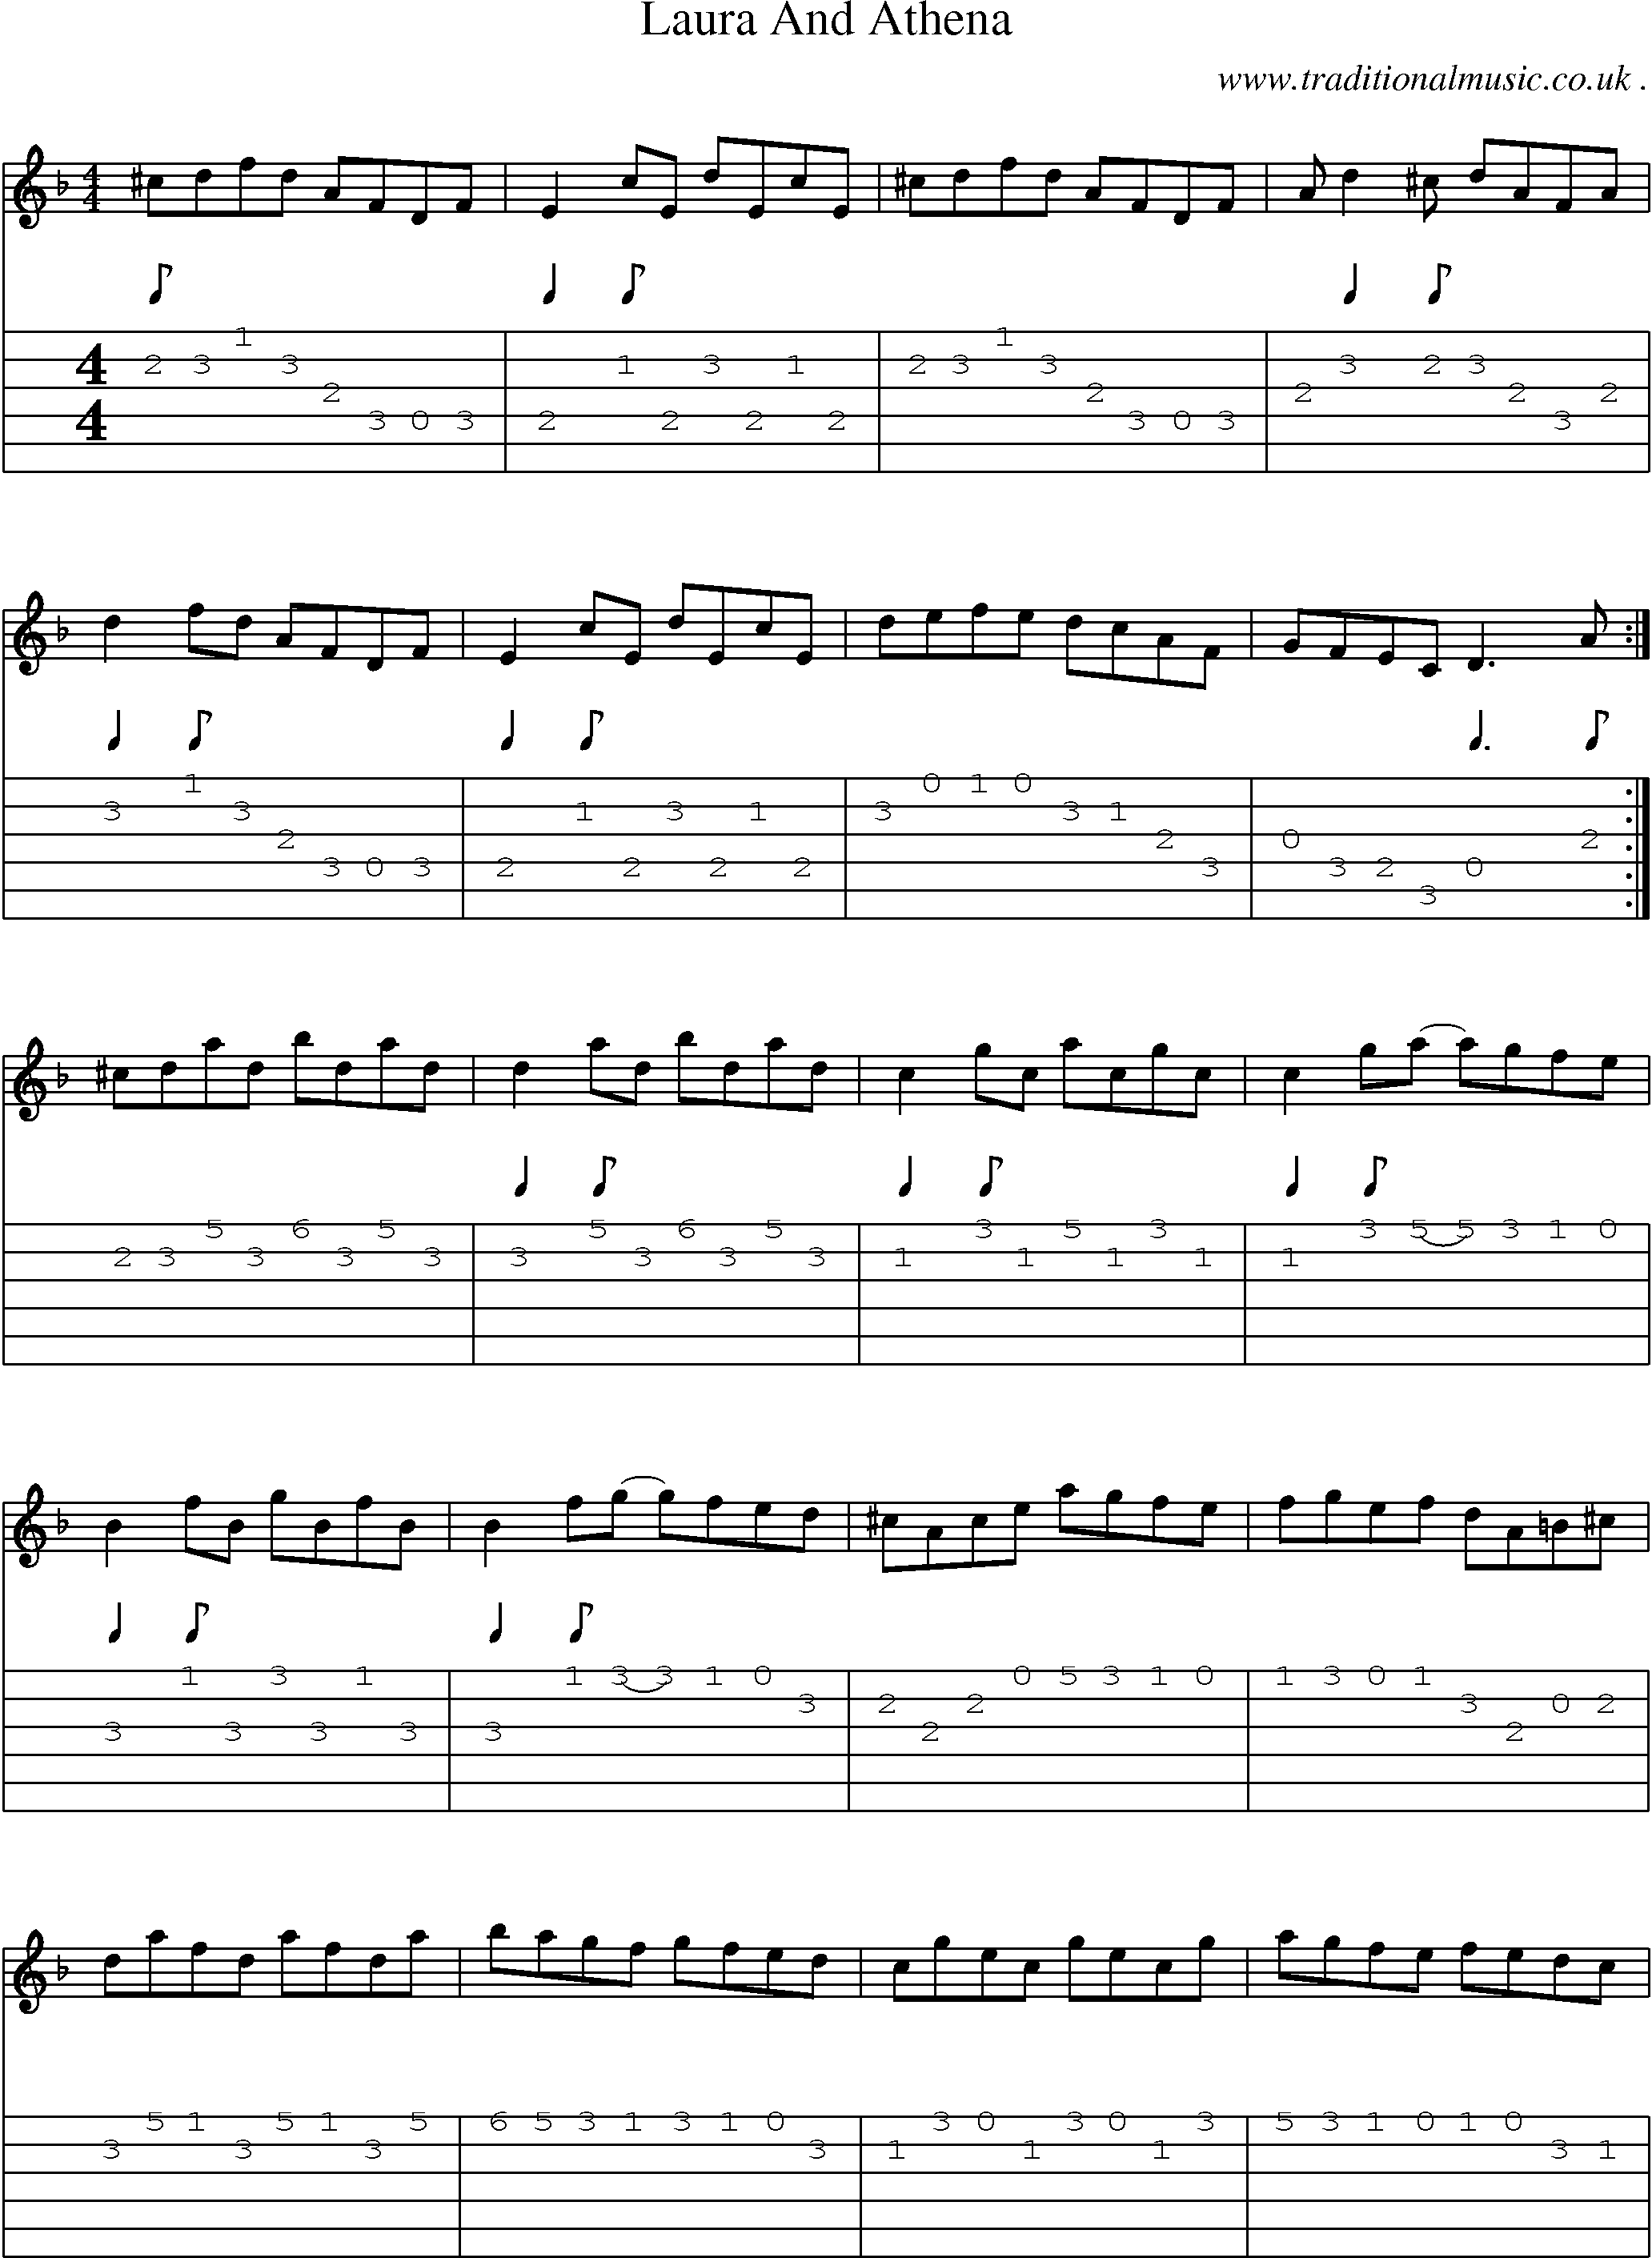 Sheet-Music and Guitar Tabs for Laura And Athena